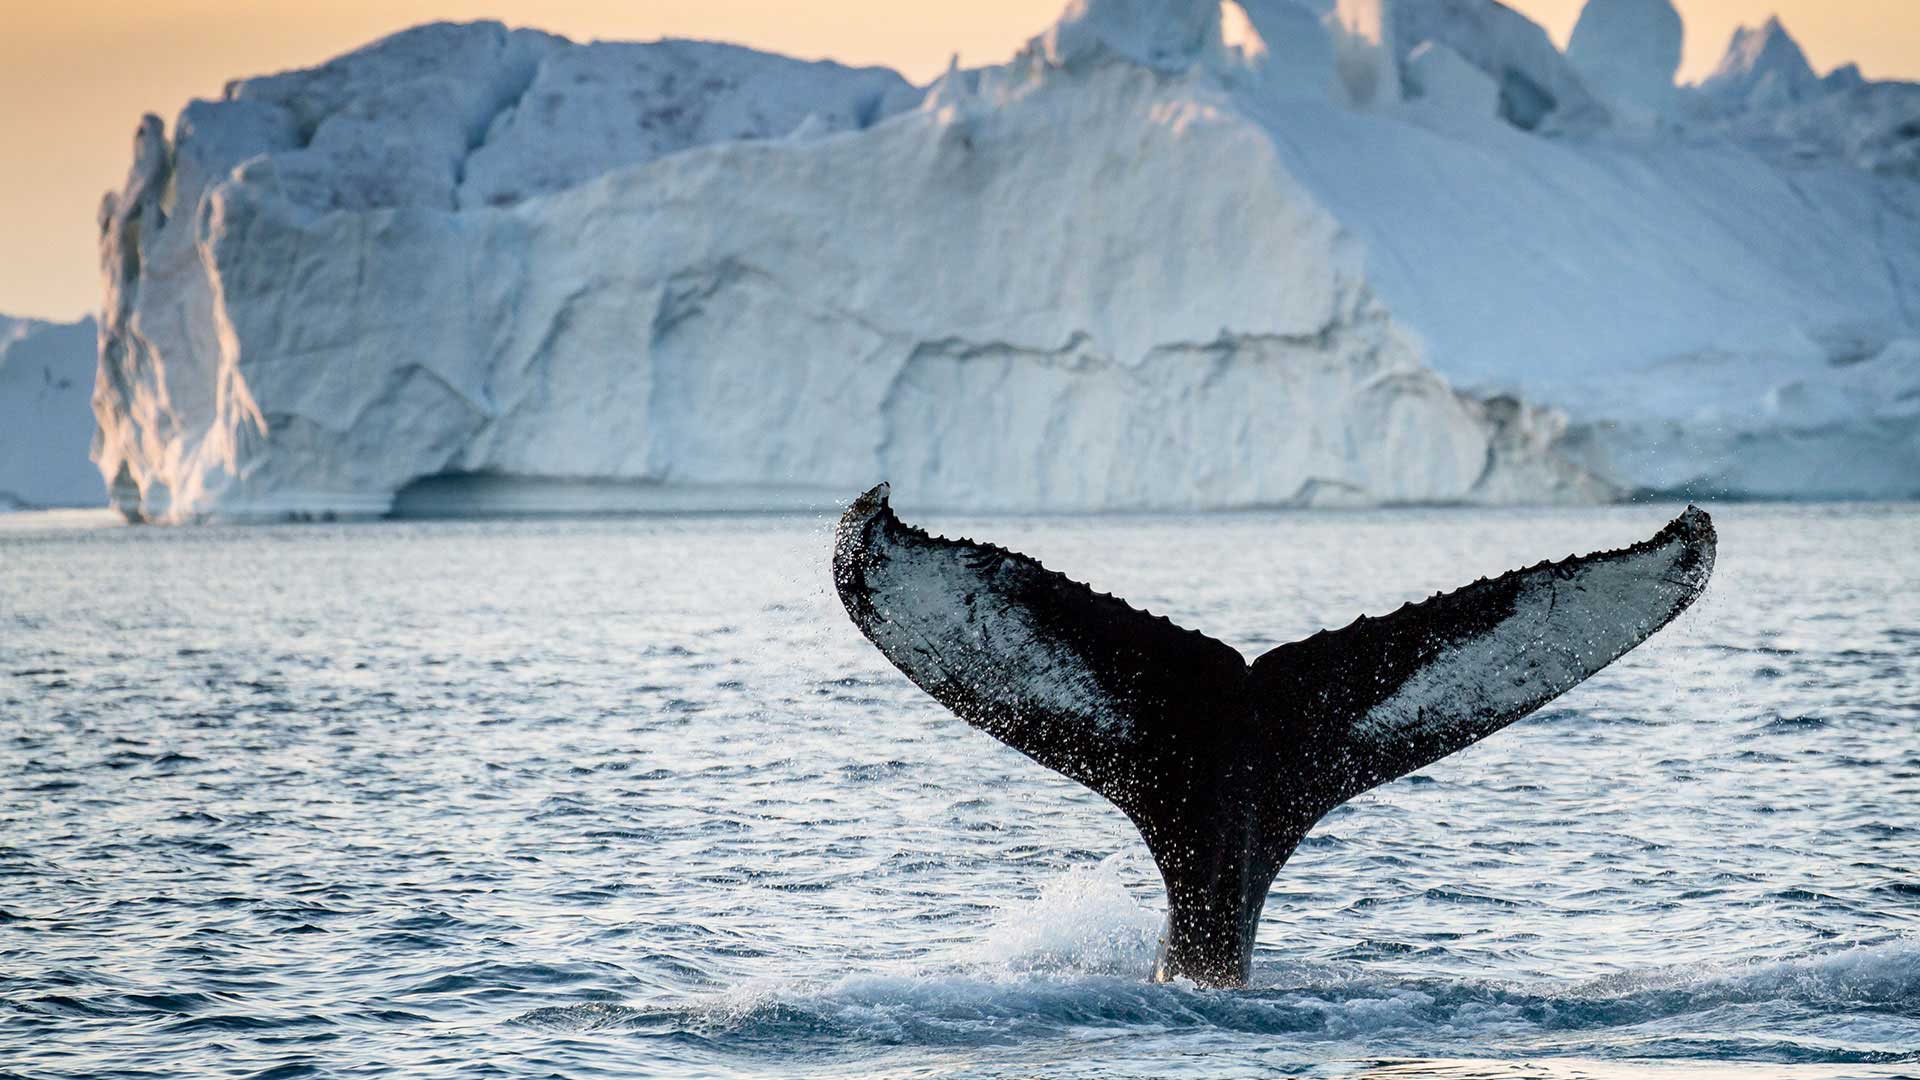 Whale swimming in the seas by Greenland